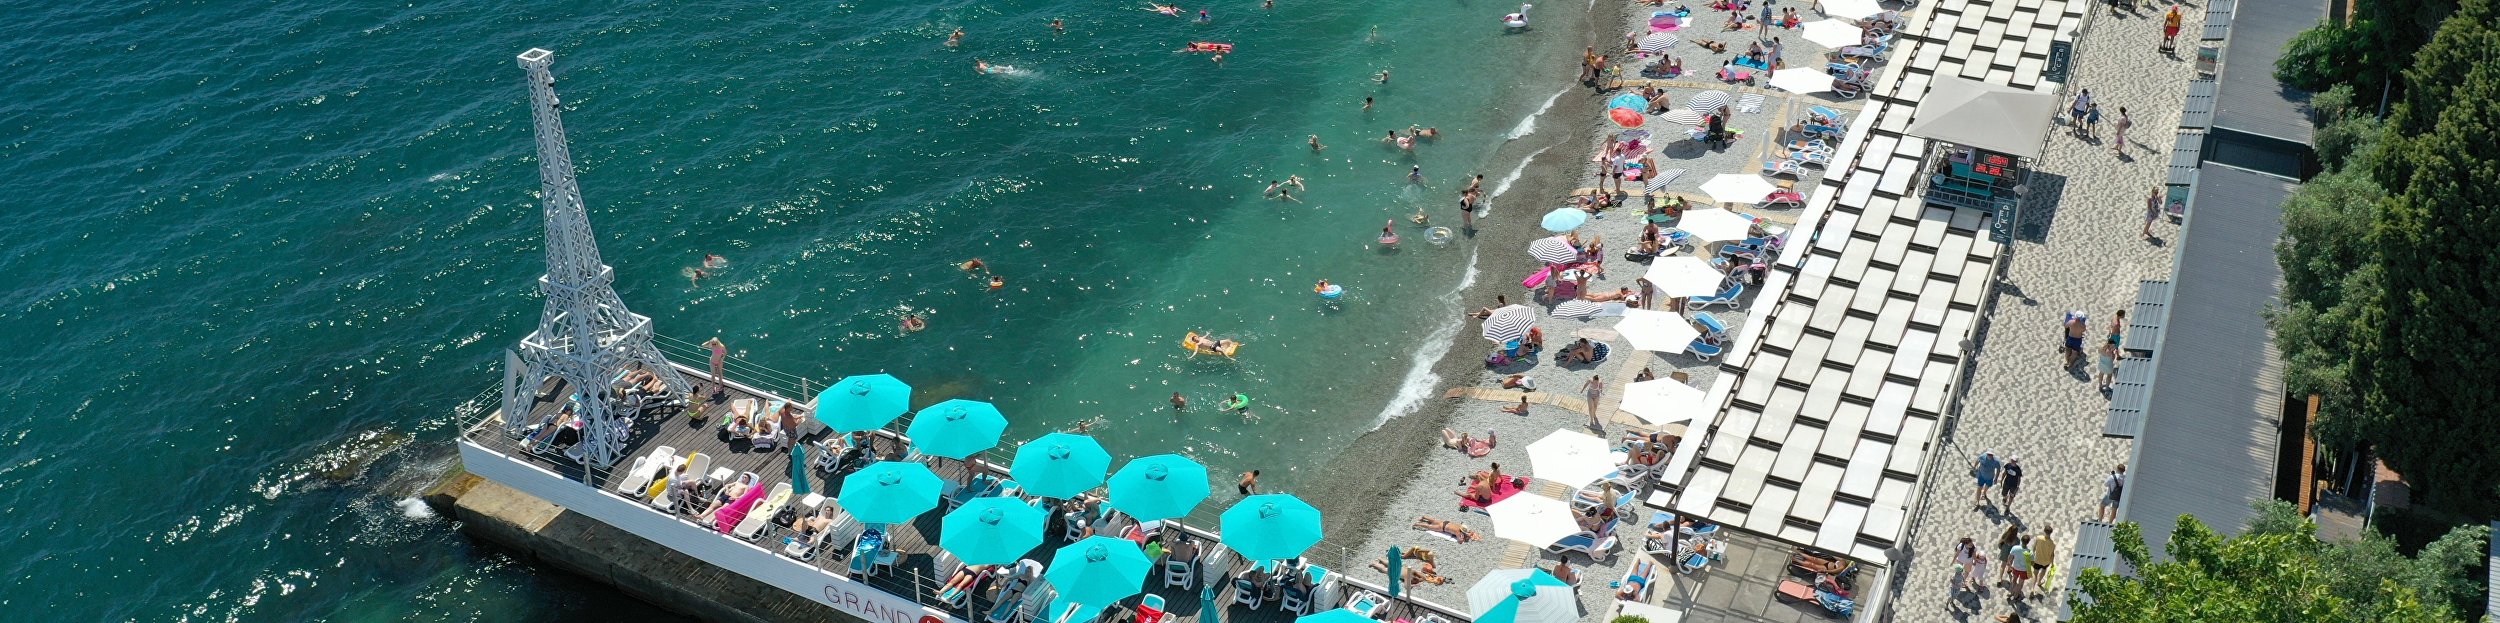 To get healthy, inspired and to fall in love: what should be done in Crimea this summer